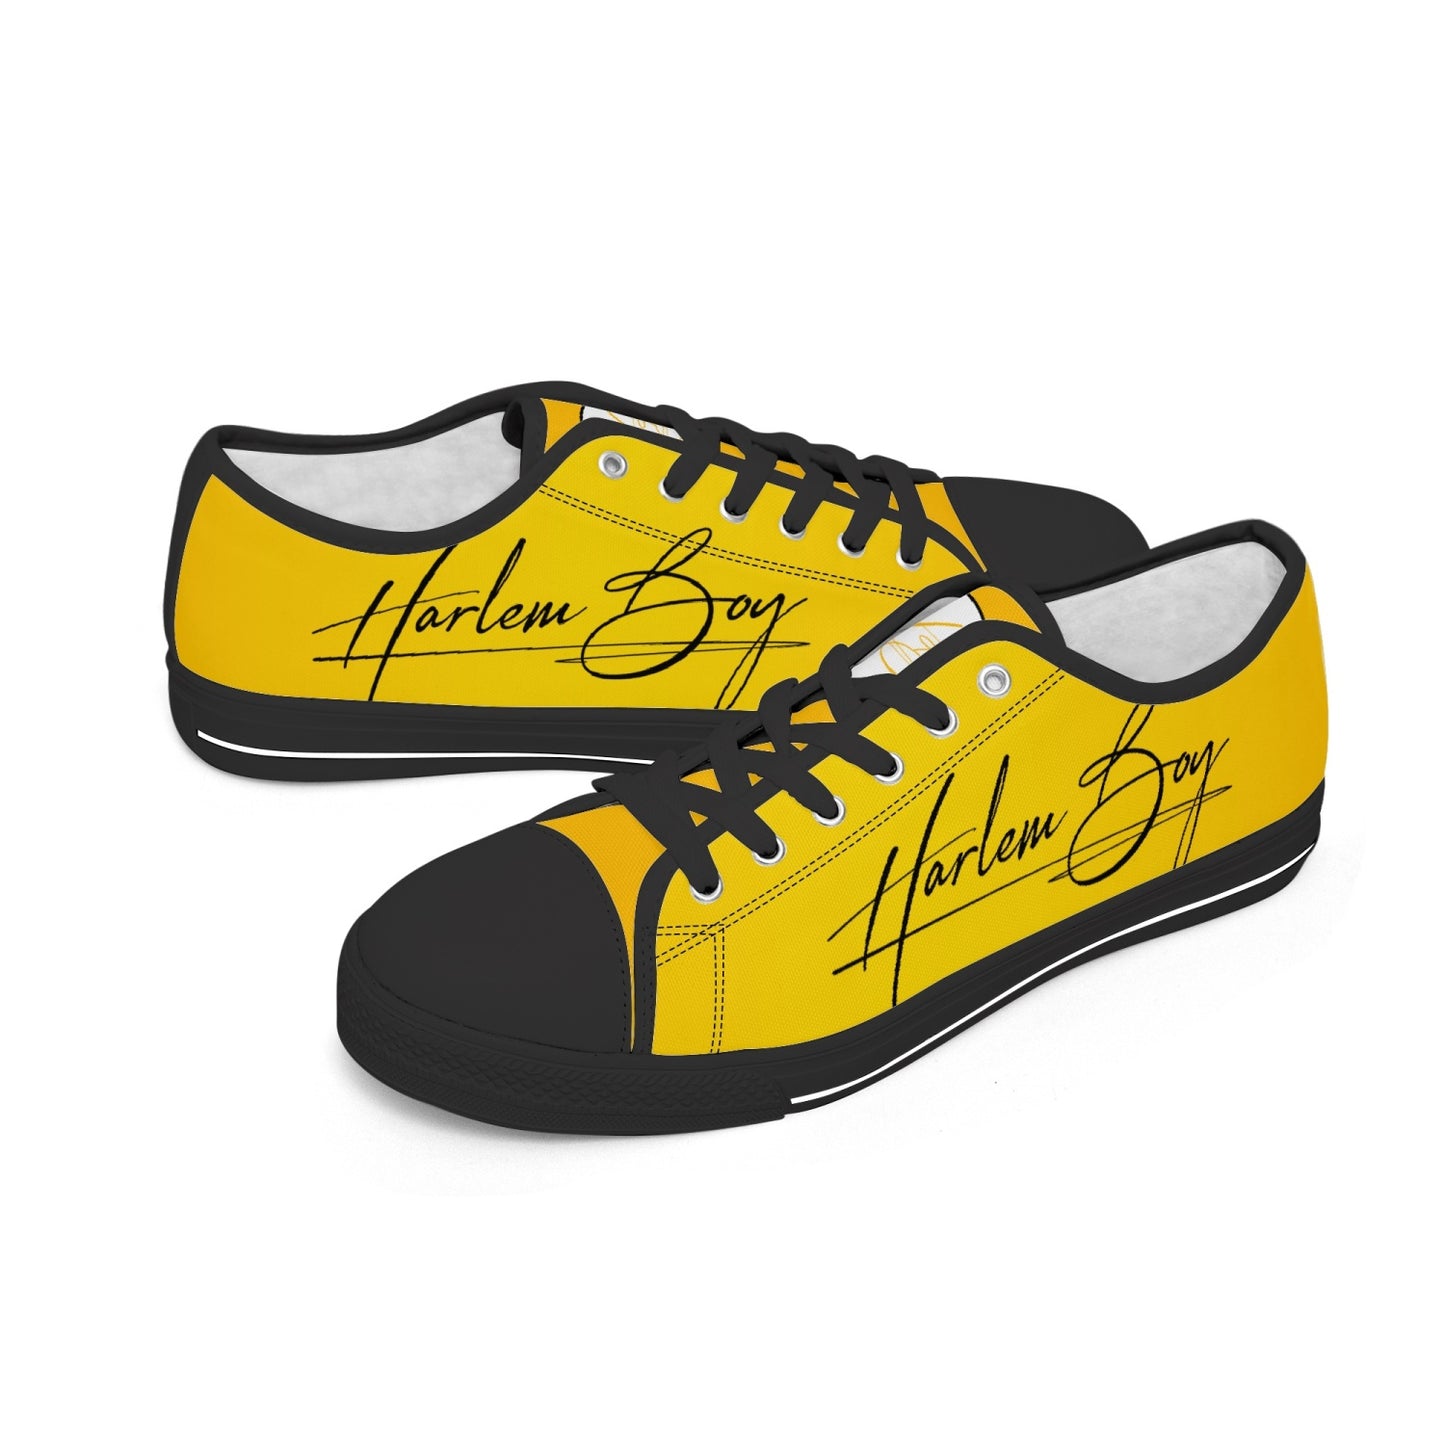 Harlem Boy "Lenox Ave" Unisex Classic Low Tops - Gold (Black or White Sole)